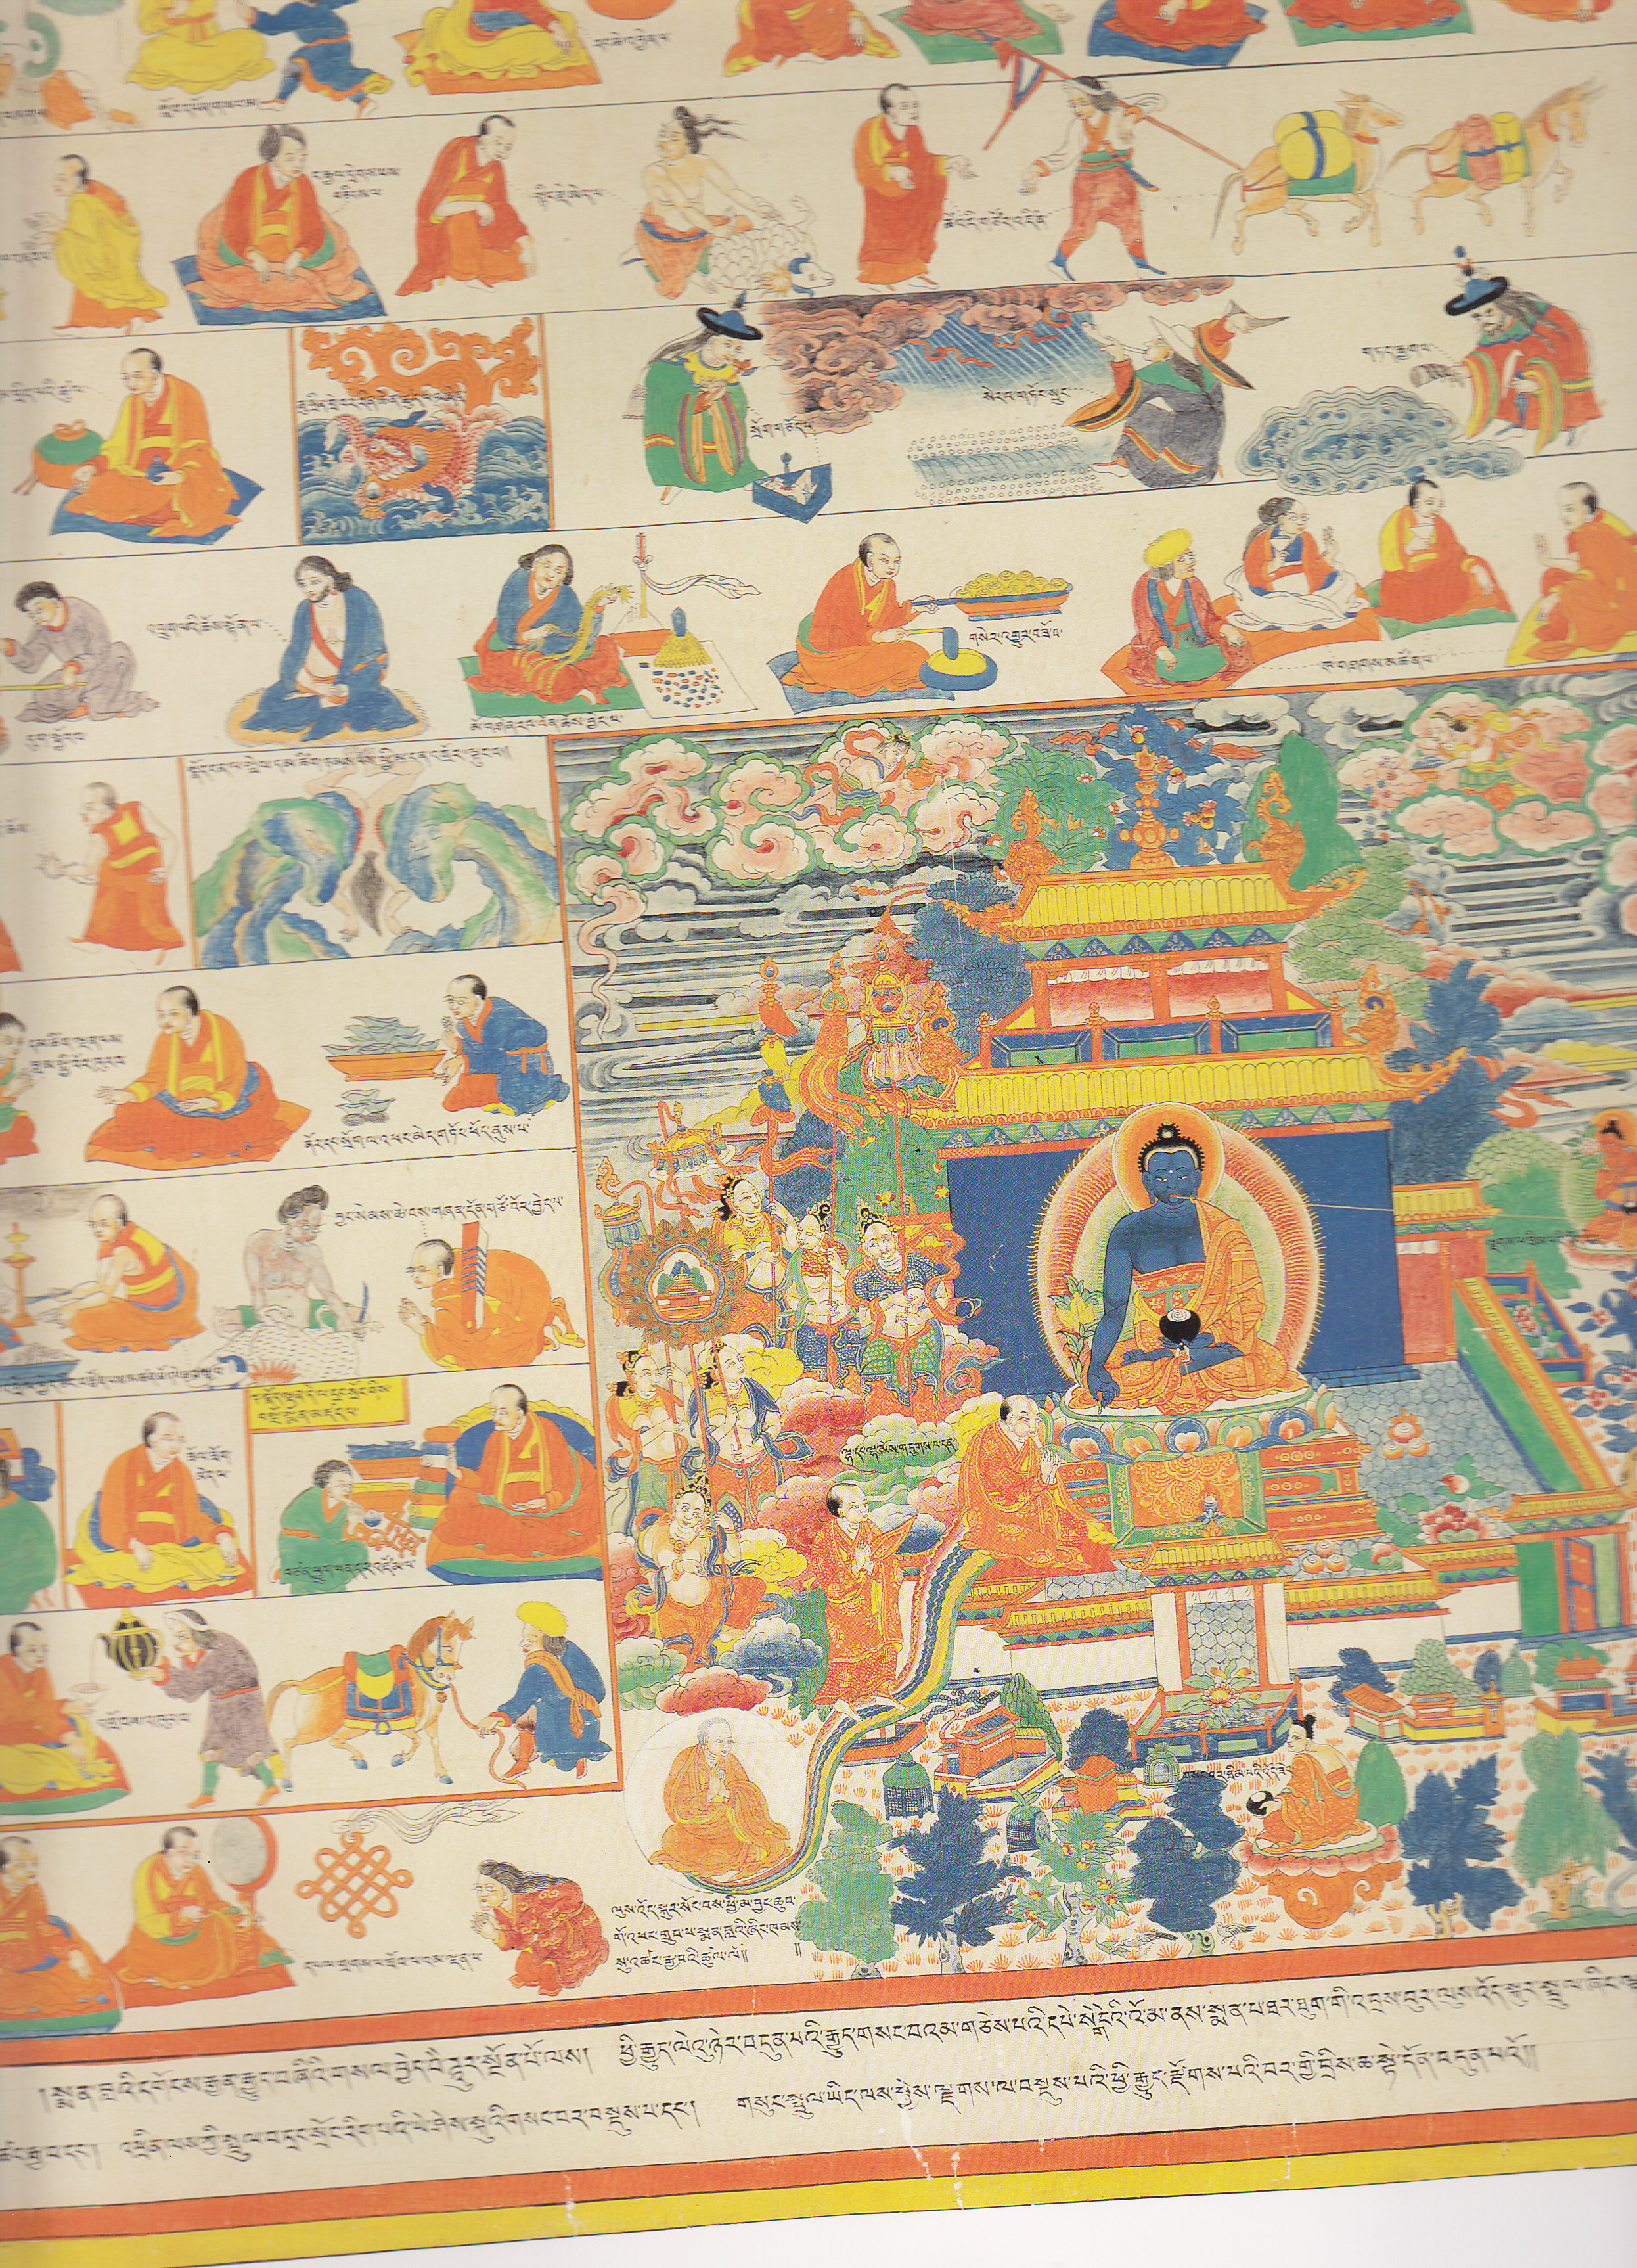 Exhibition of Tibetan Medical Paintings showcased in Moscow